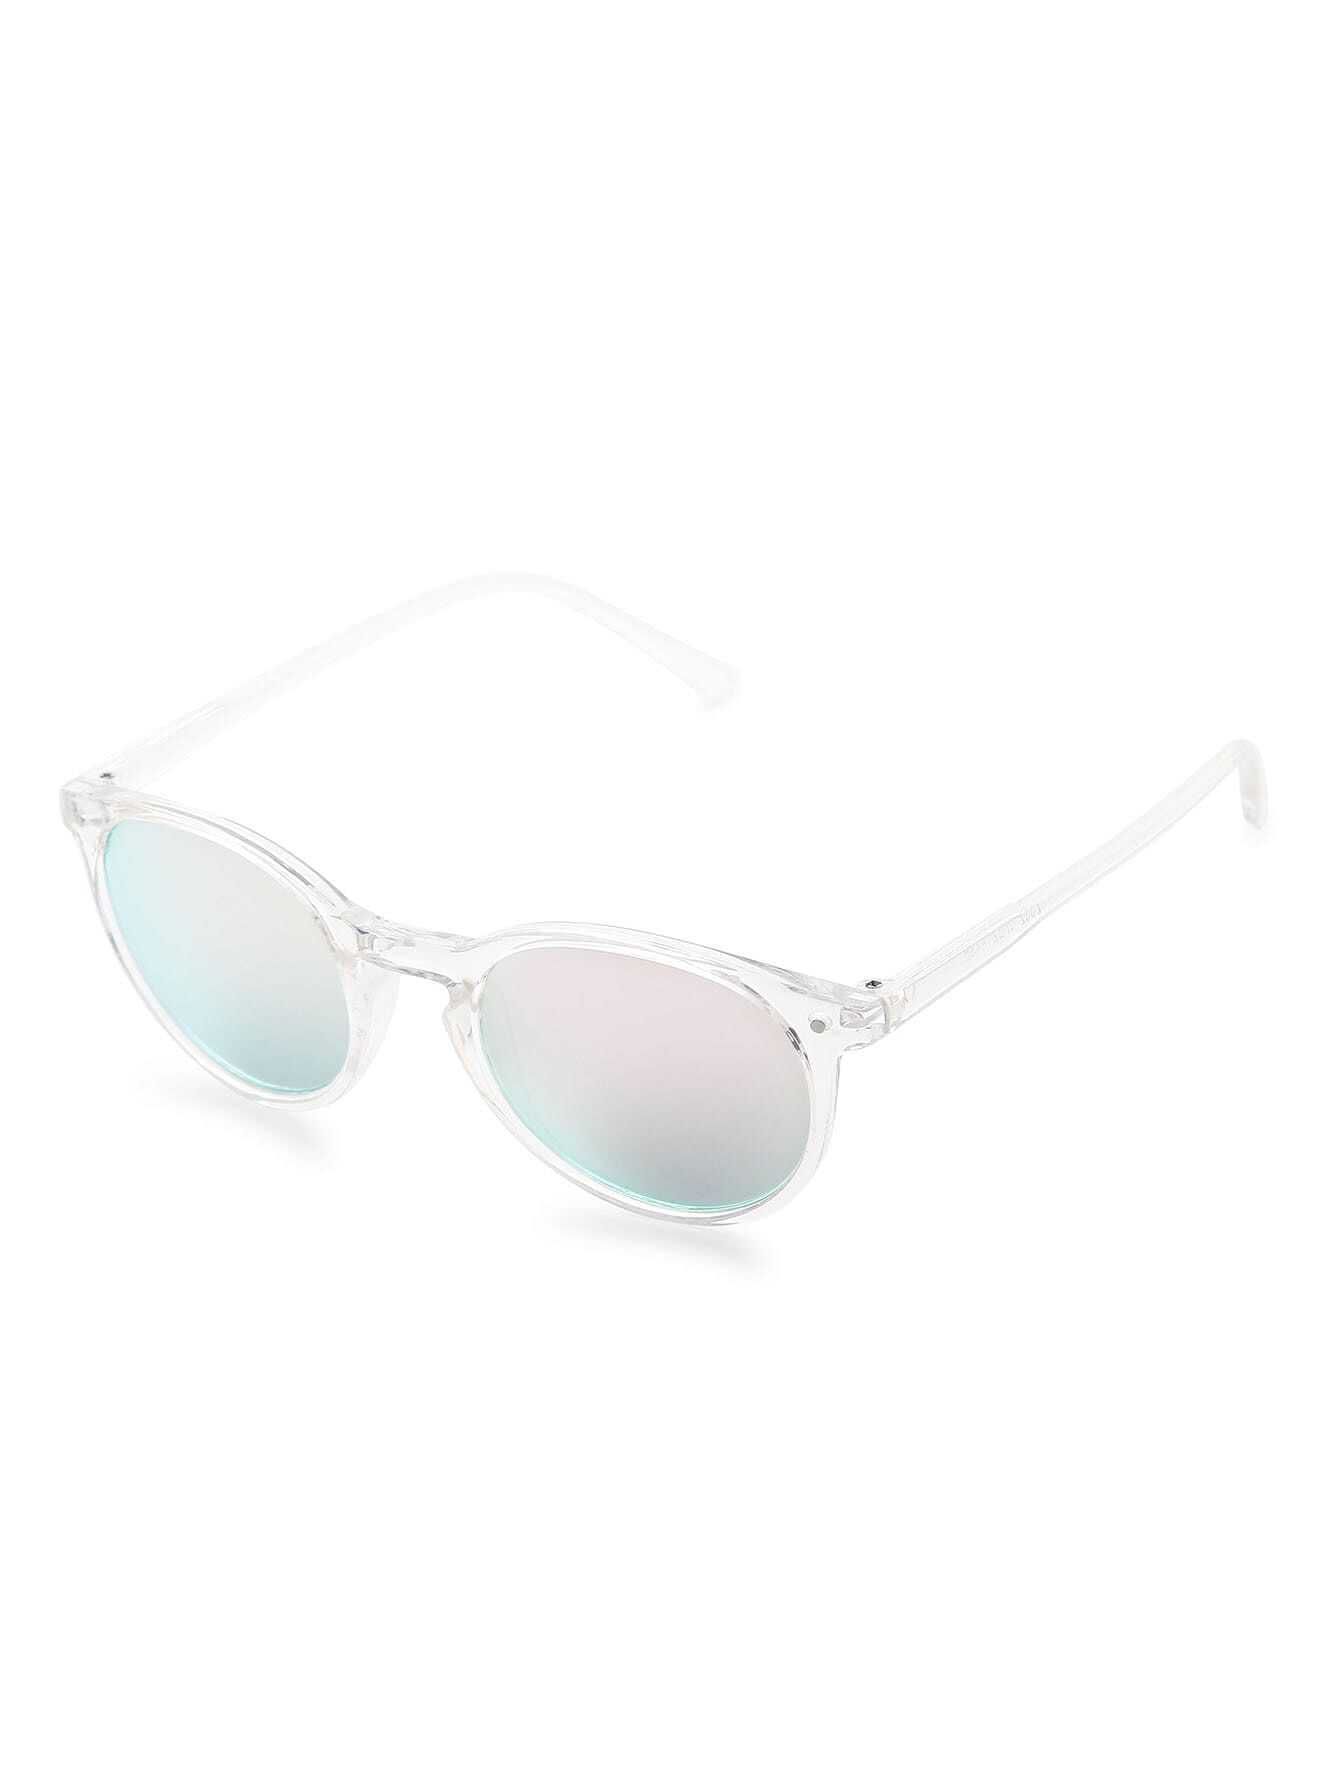 Clear Frame Pink Lens Sunglasses | ROMWE